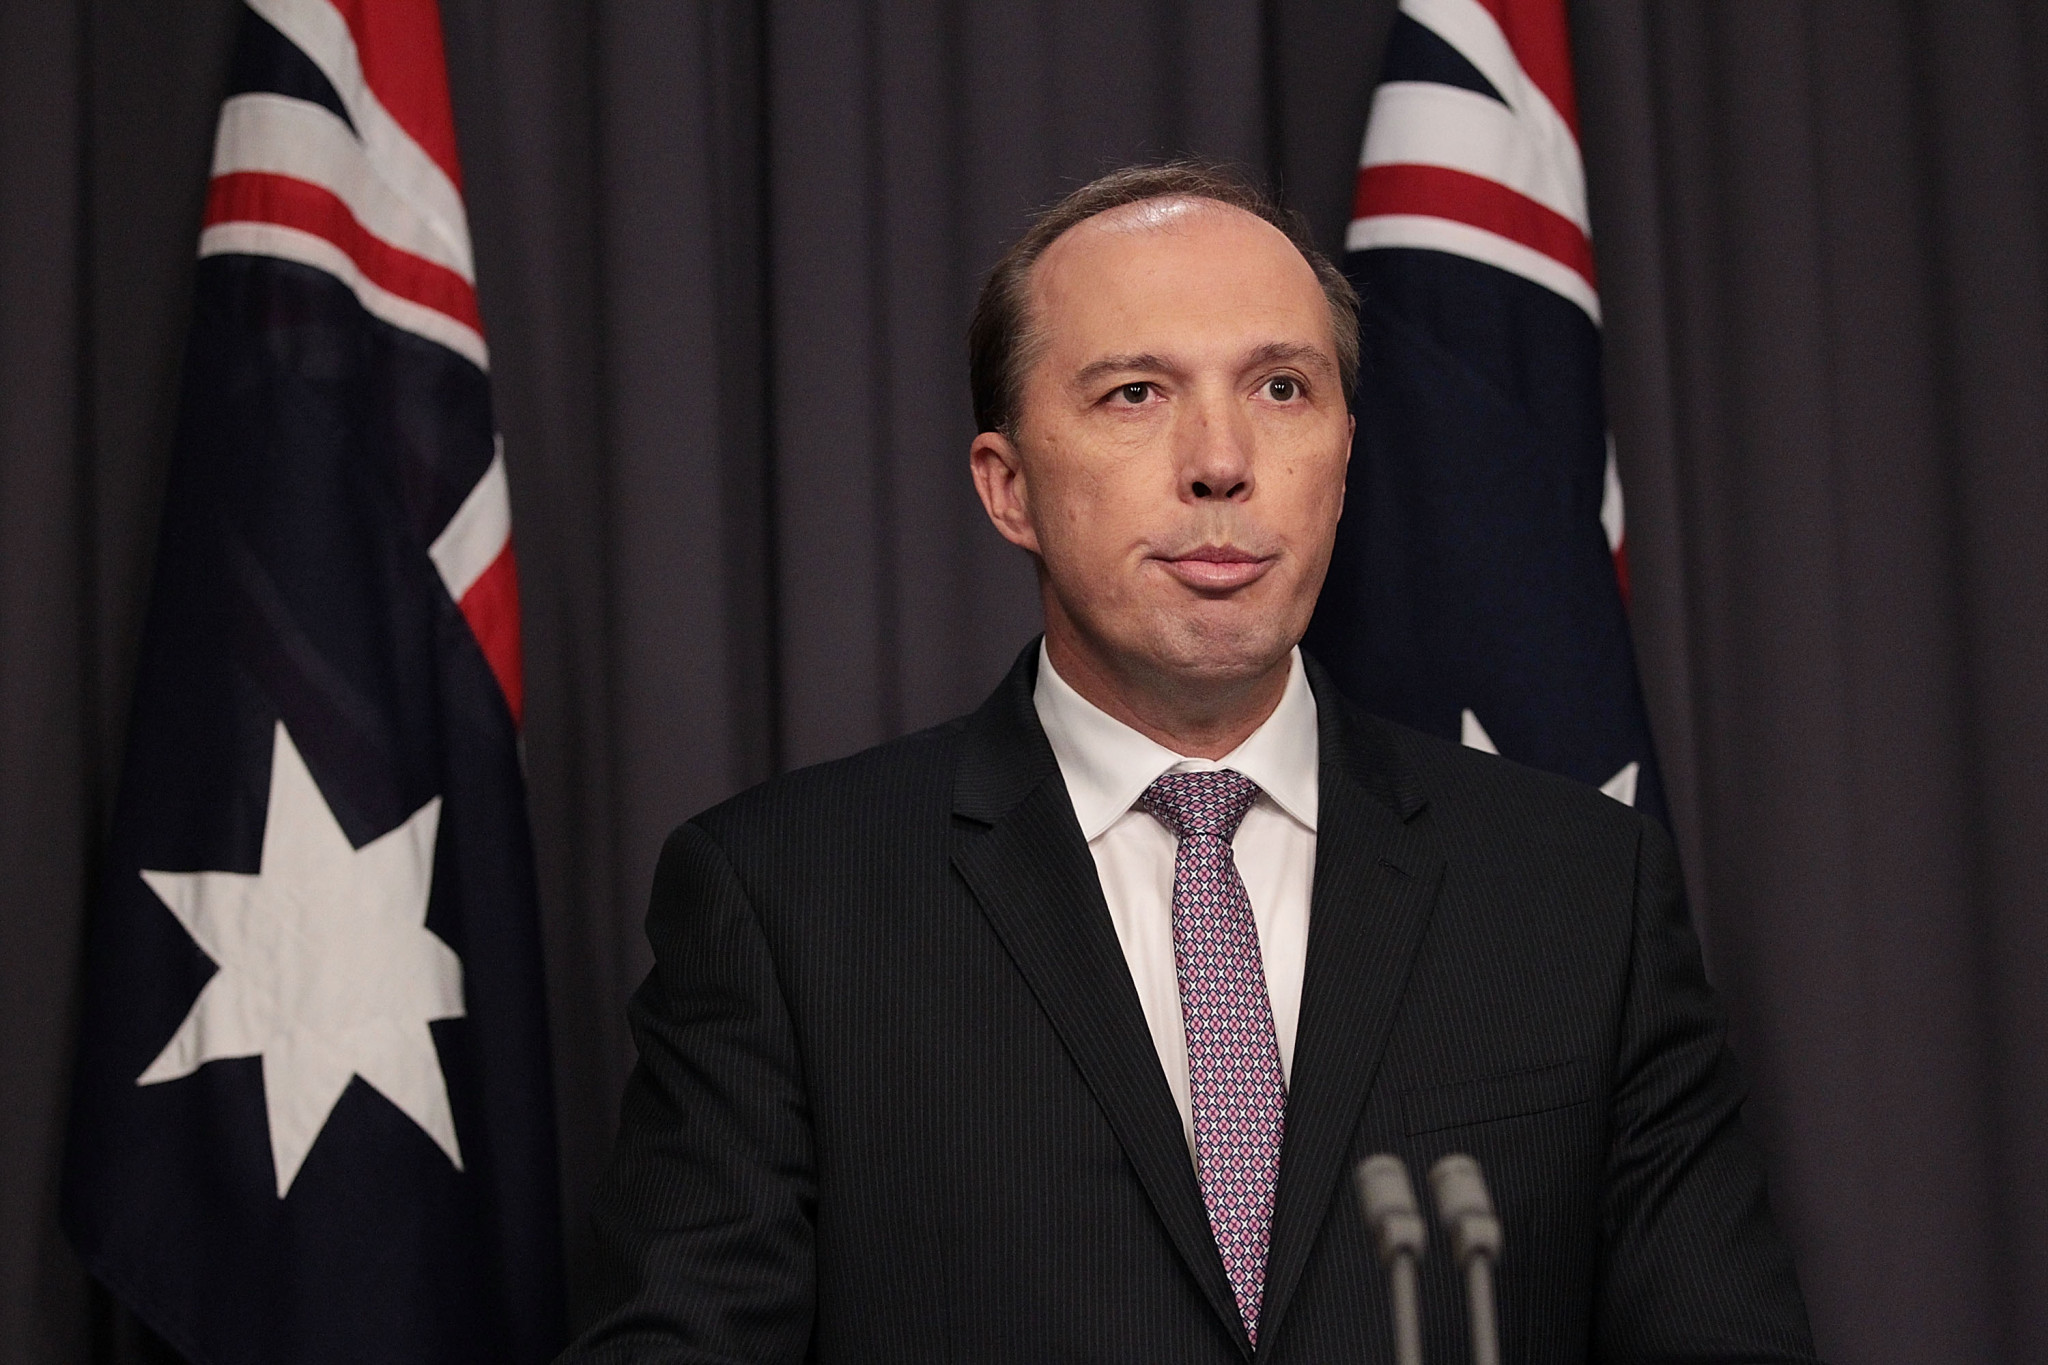 Home Affairs Minister Peter Dutton has urged missing athletes to give themselves up ©Getty Images